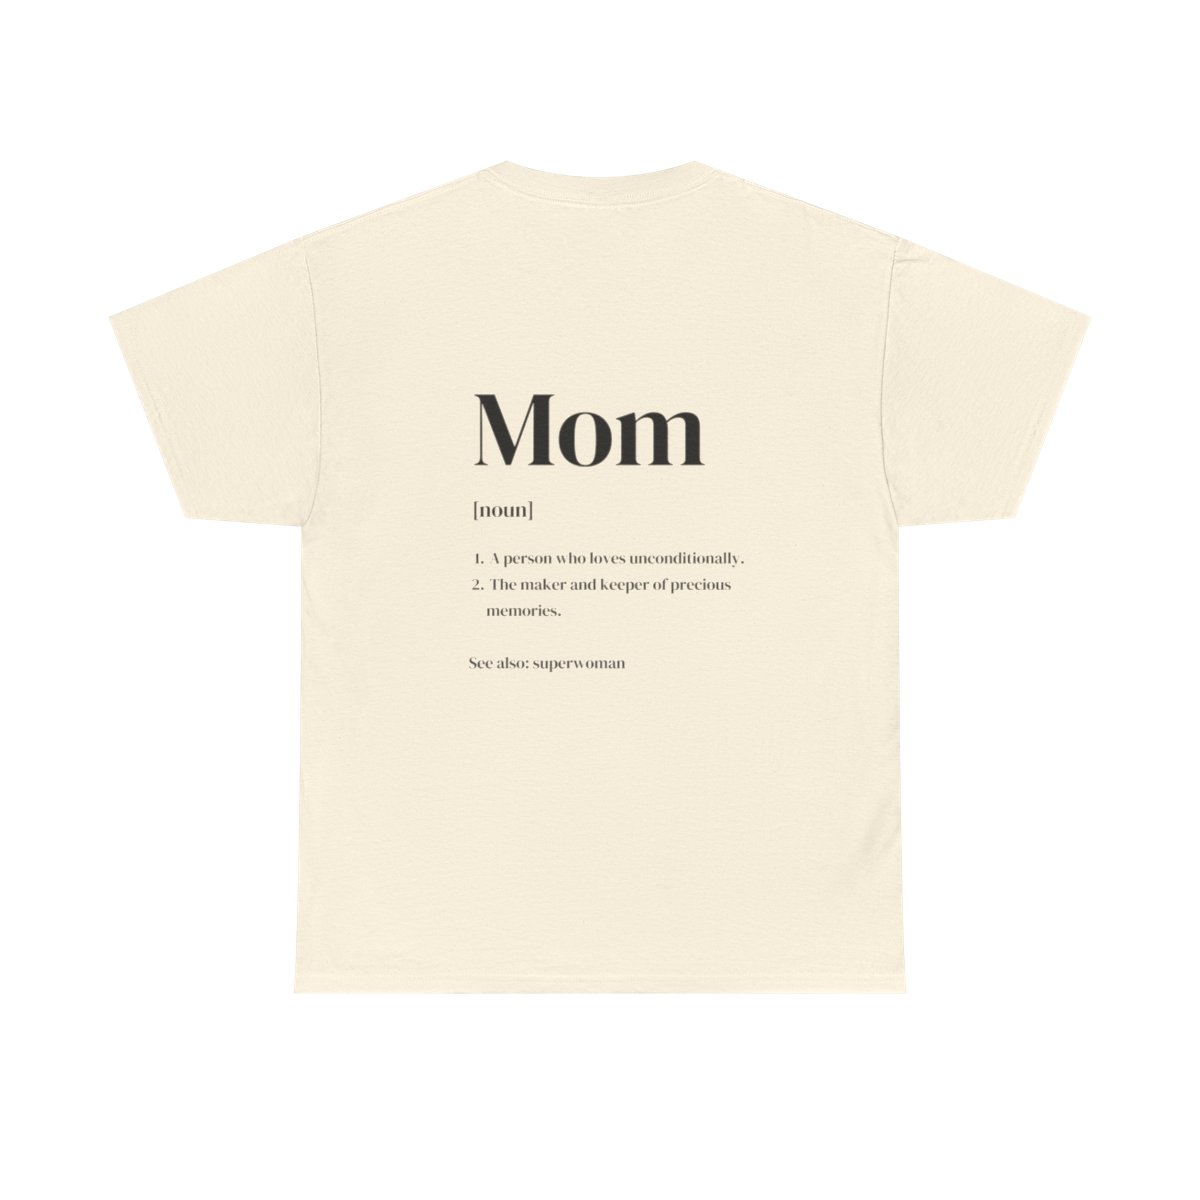 Mom – definition – T-shirt – on the back